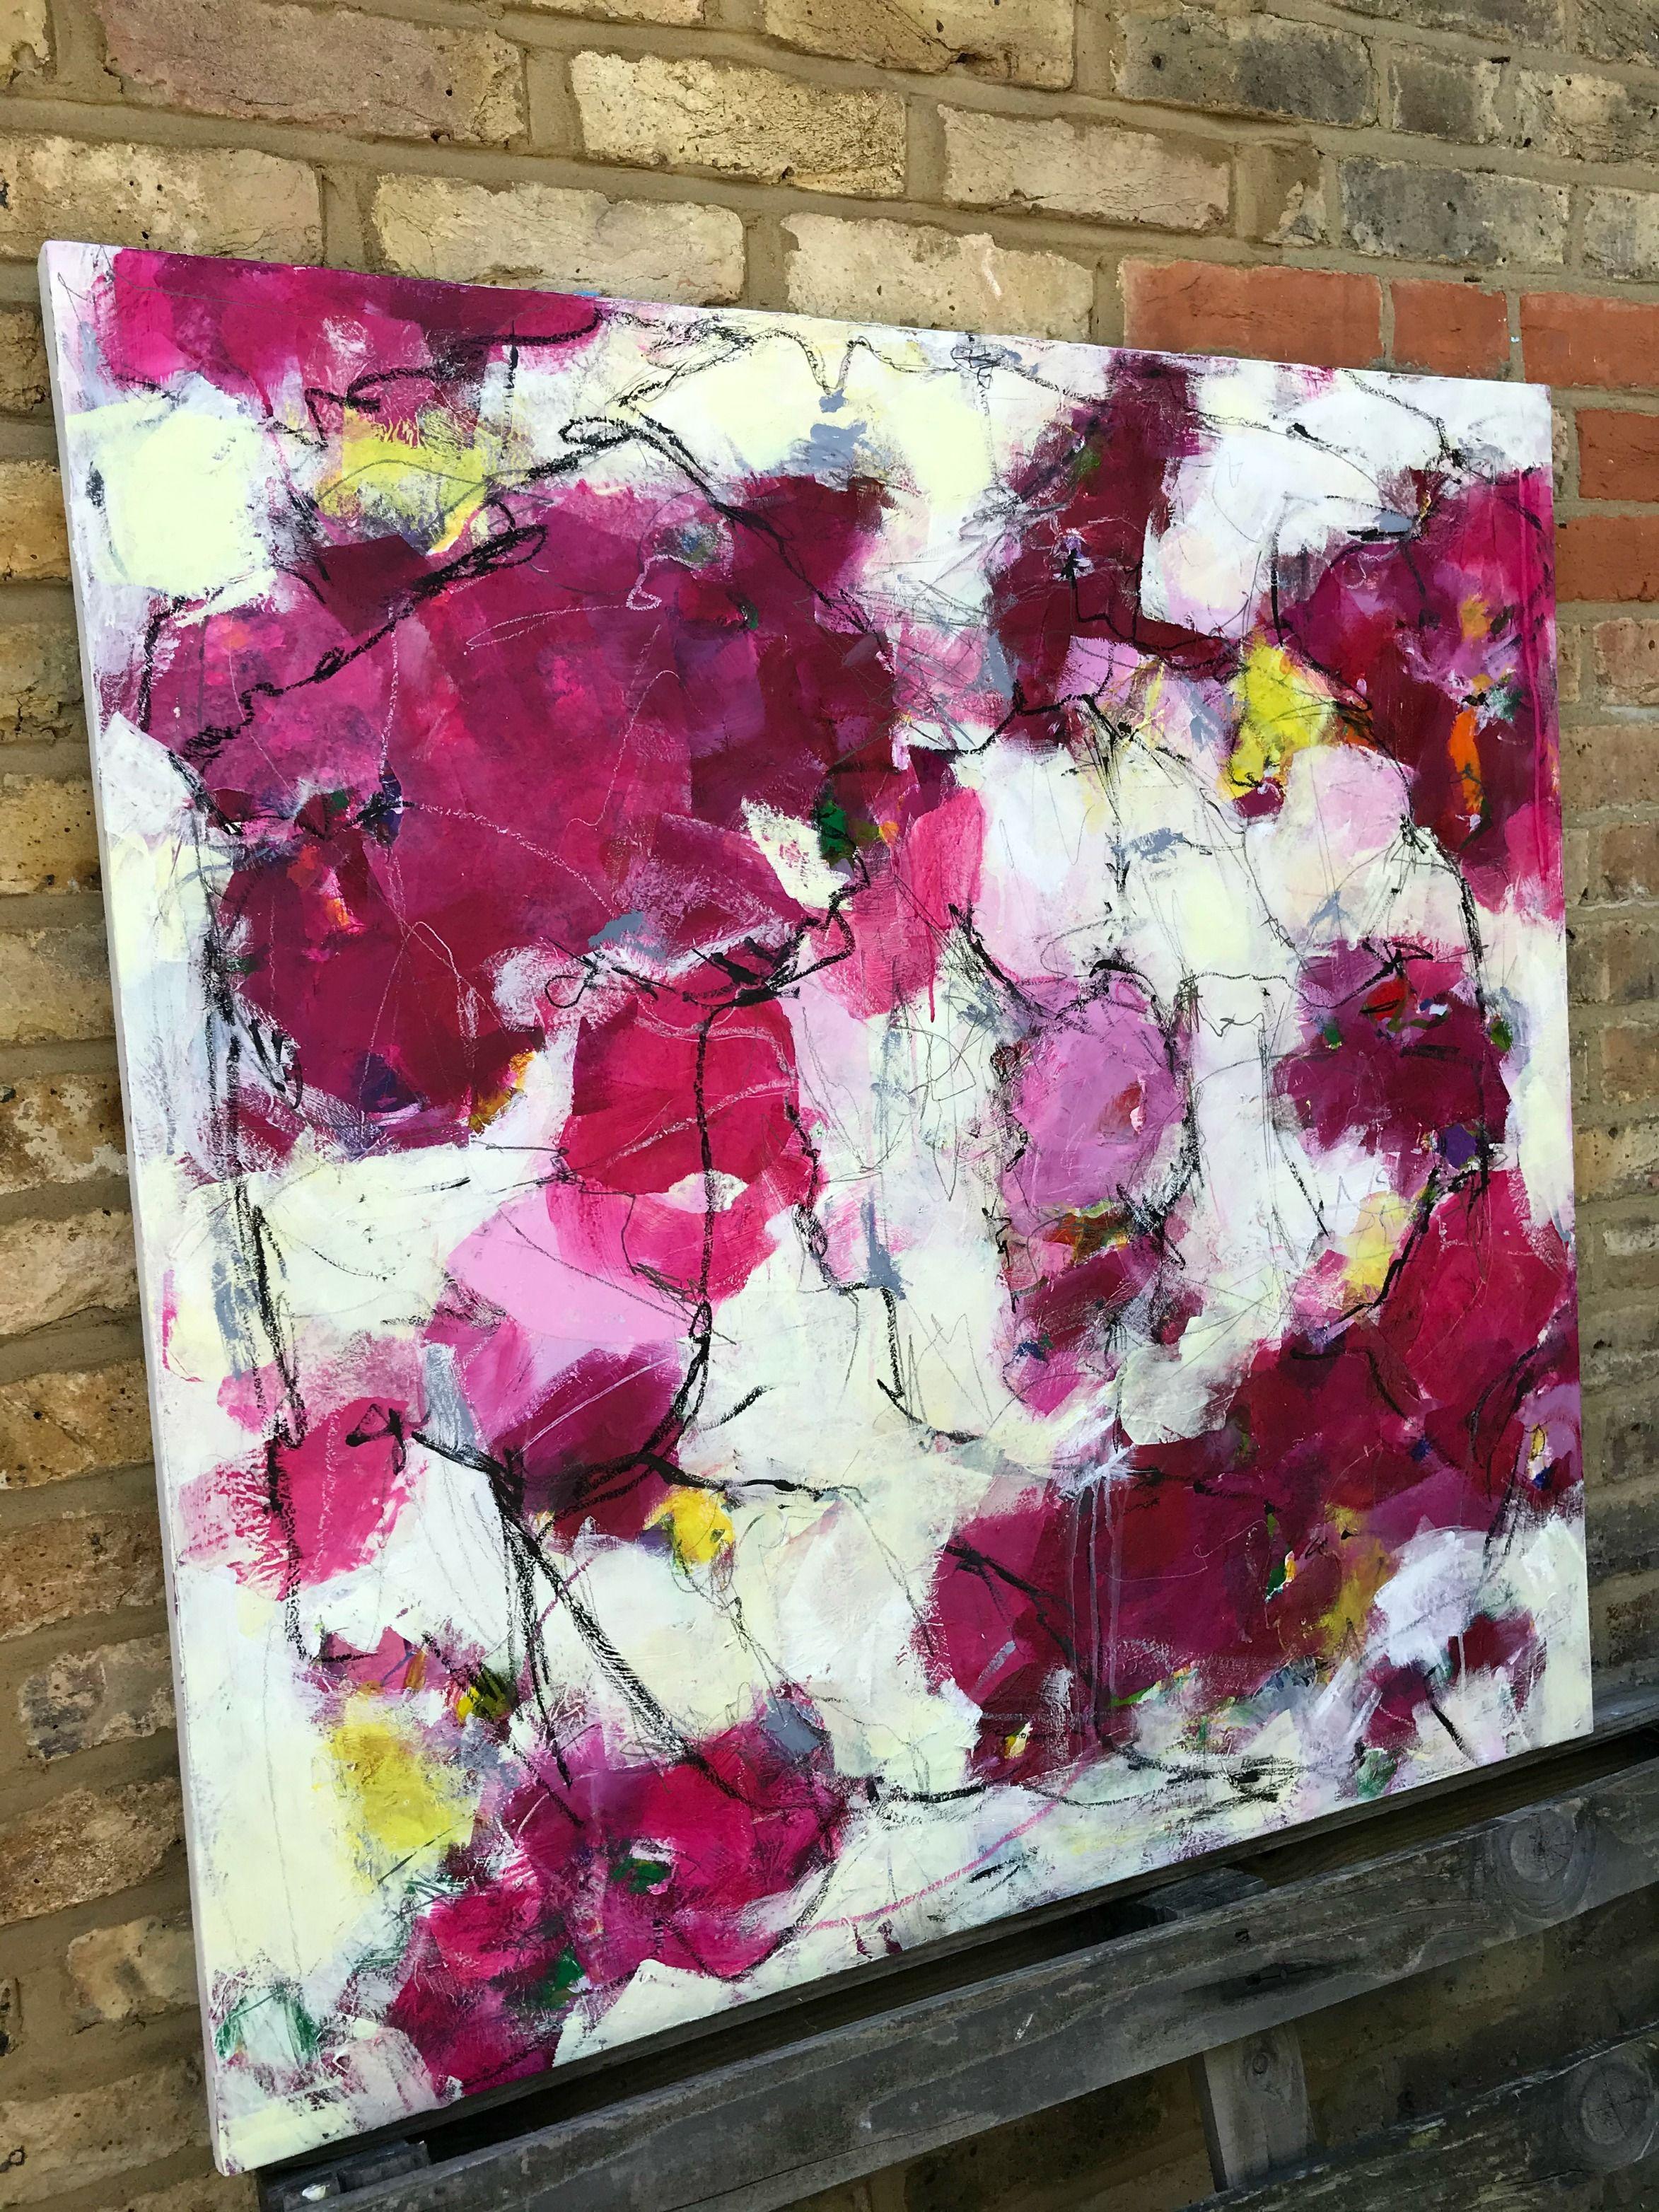 Promising A Rose Garden, Painting, Acrylic on Canvas - Gray Abstract Painting by Angela Dierks